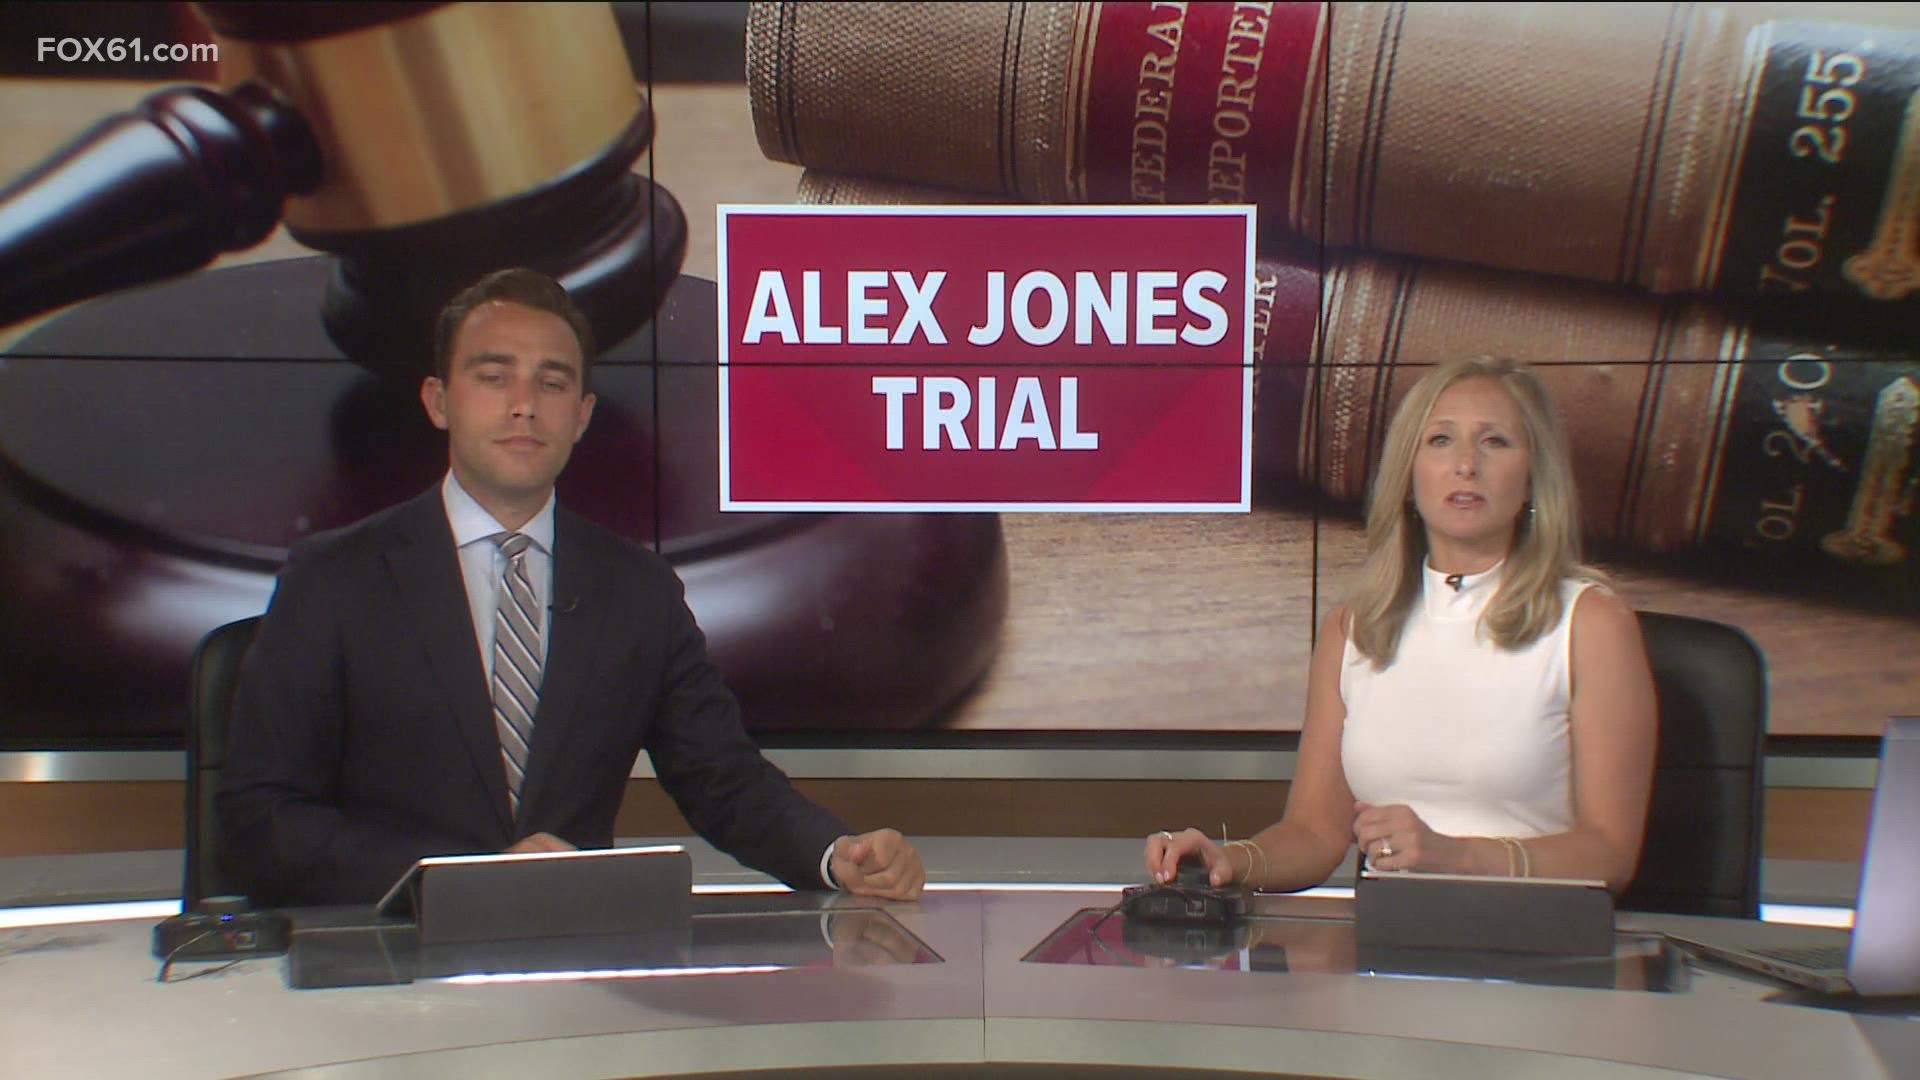 The jury will begin hearing arguments at the Waterbury Superior Court on Tuesday to try to determine how much Alex Jones should pay victims' families in damages.